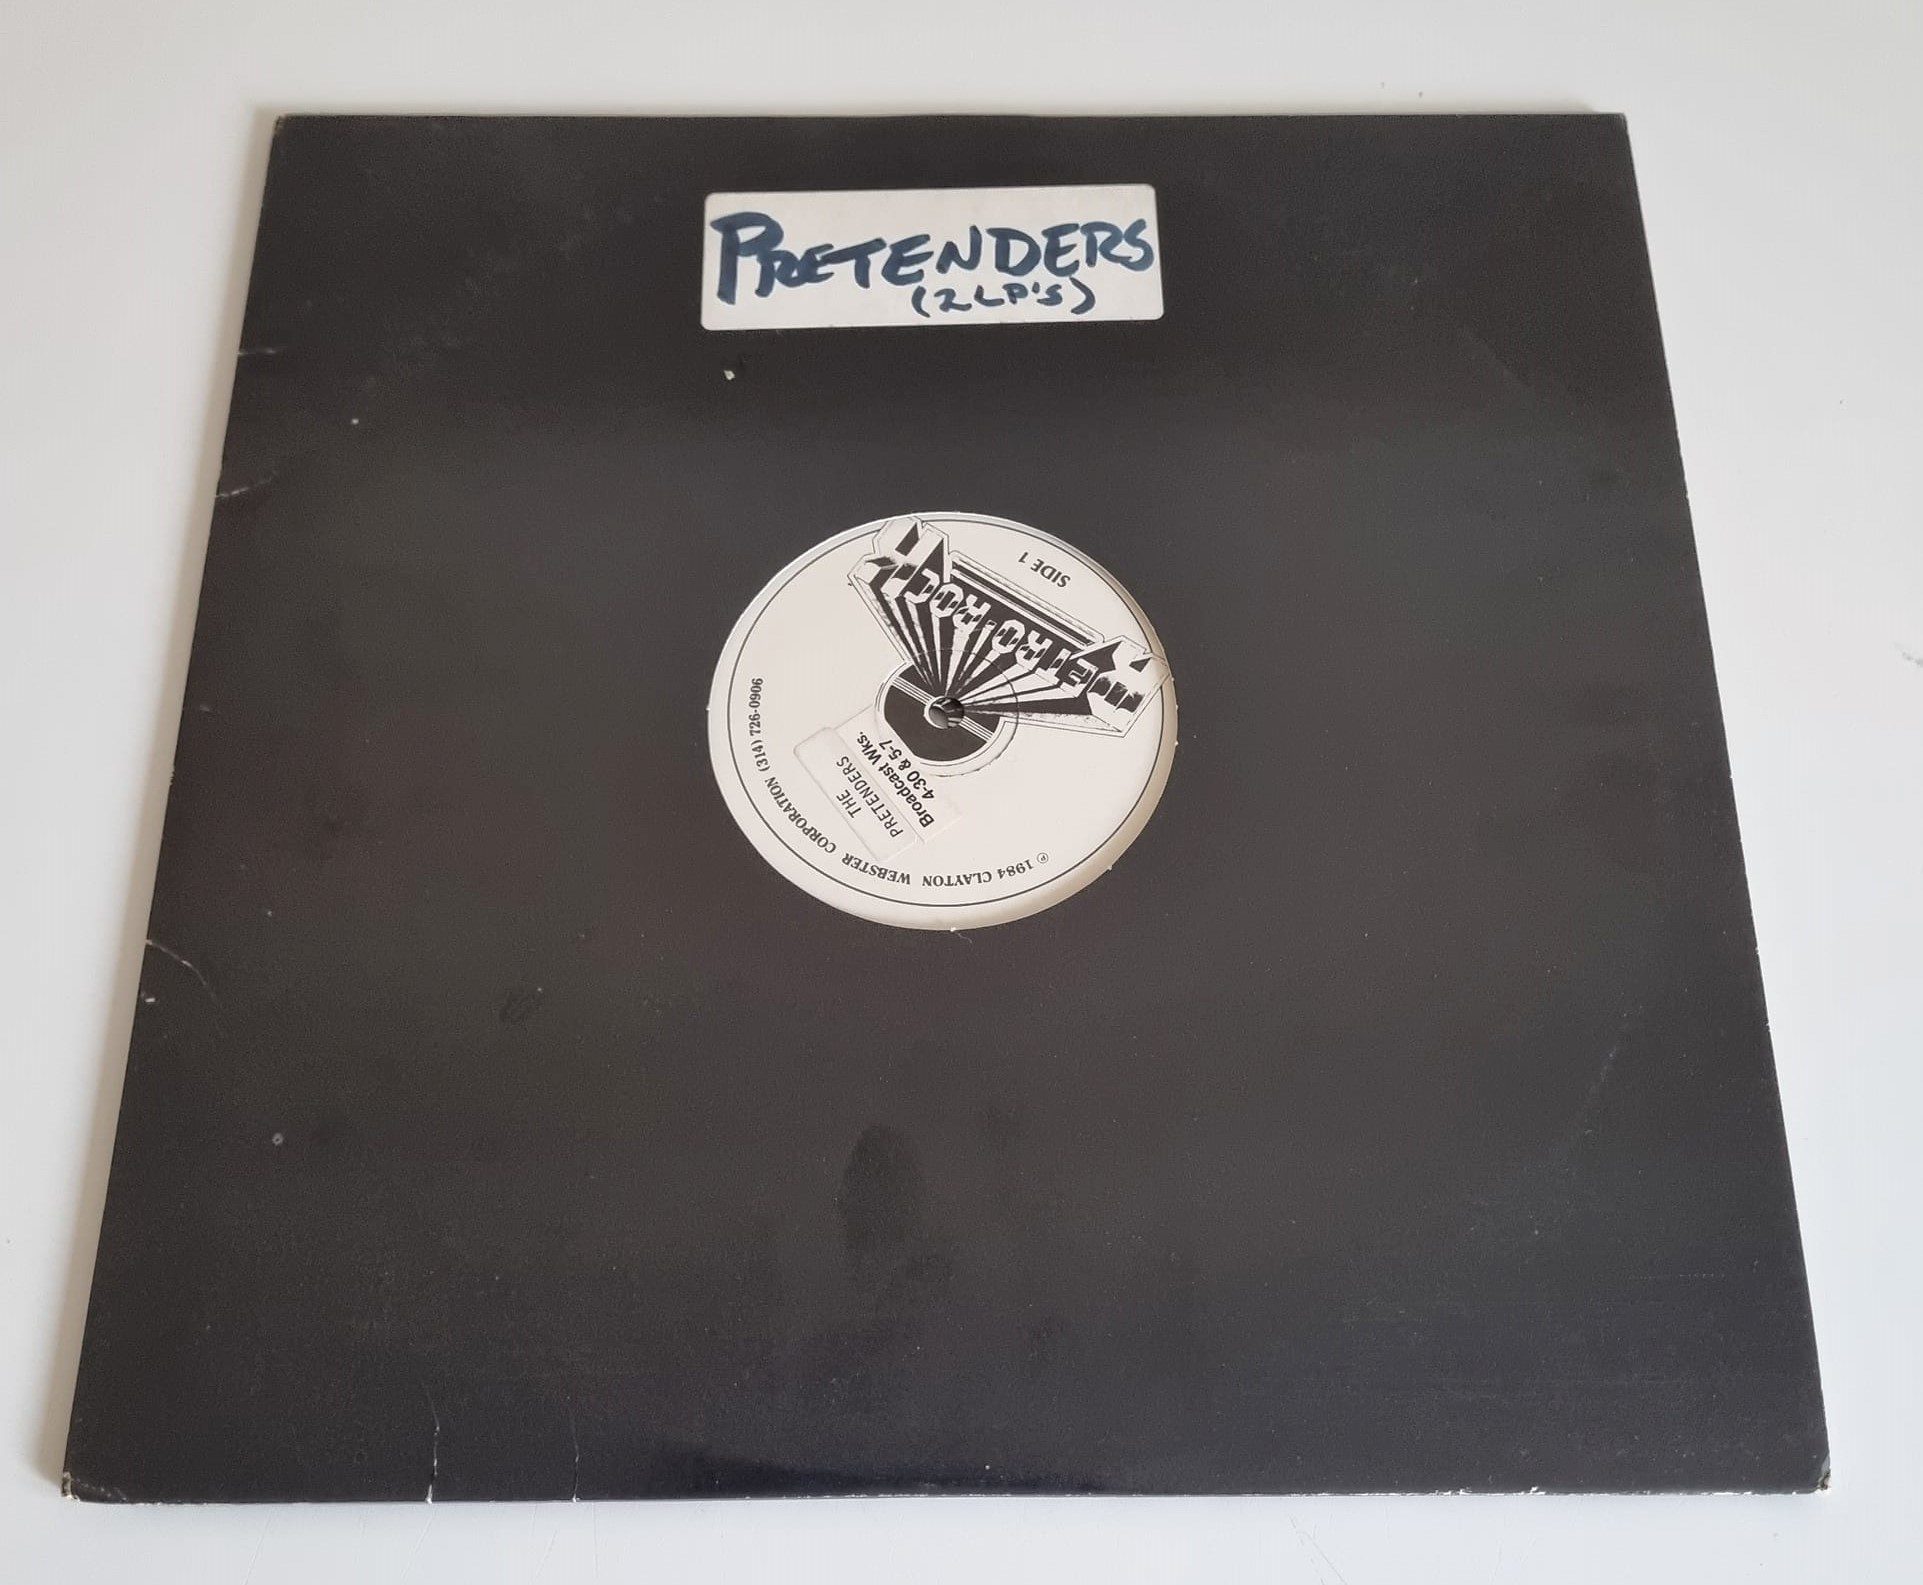 Buy this rare Pretenders record by clicking here